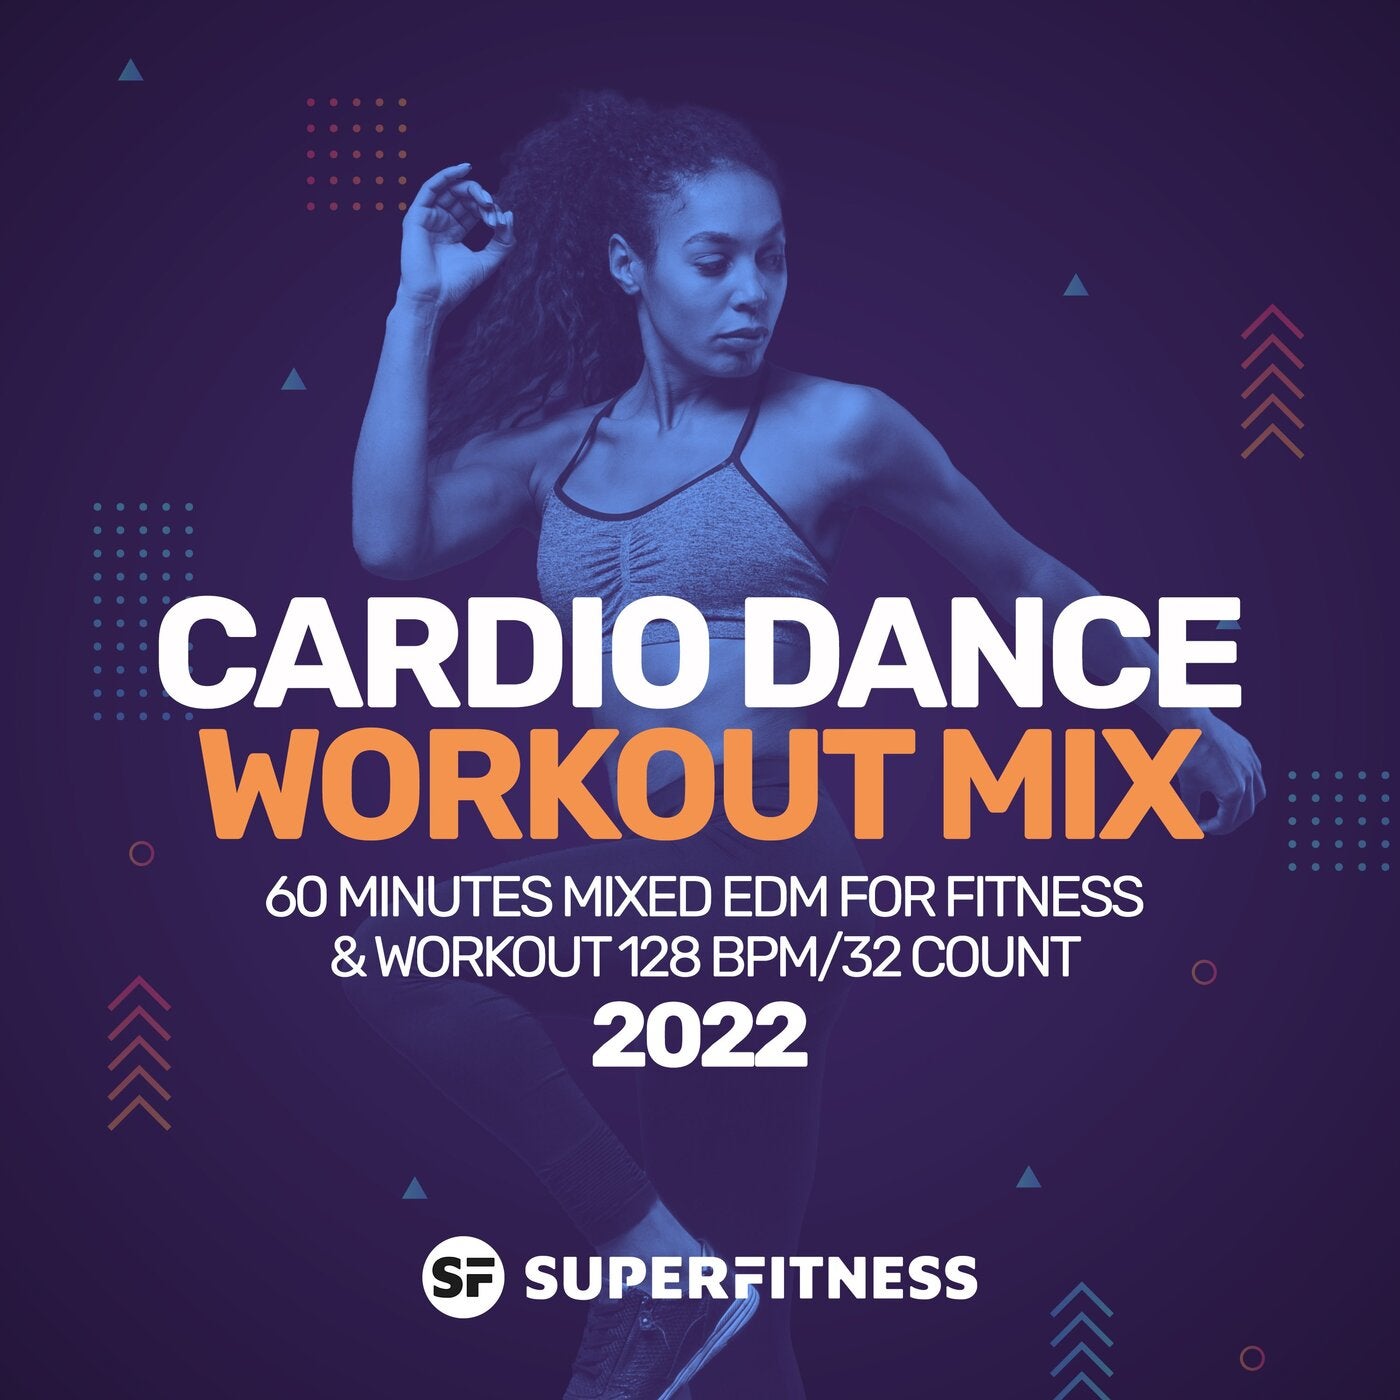 Cardio Dance Workout Mix 2022: 60 Minutes Mixed EDM for Fitness & Workout 128 bpm/32 count